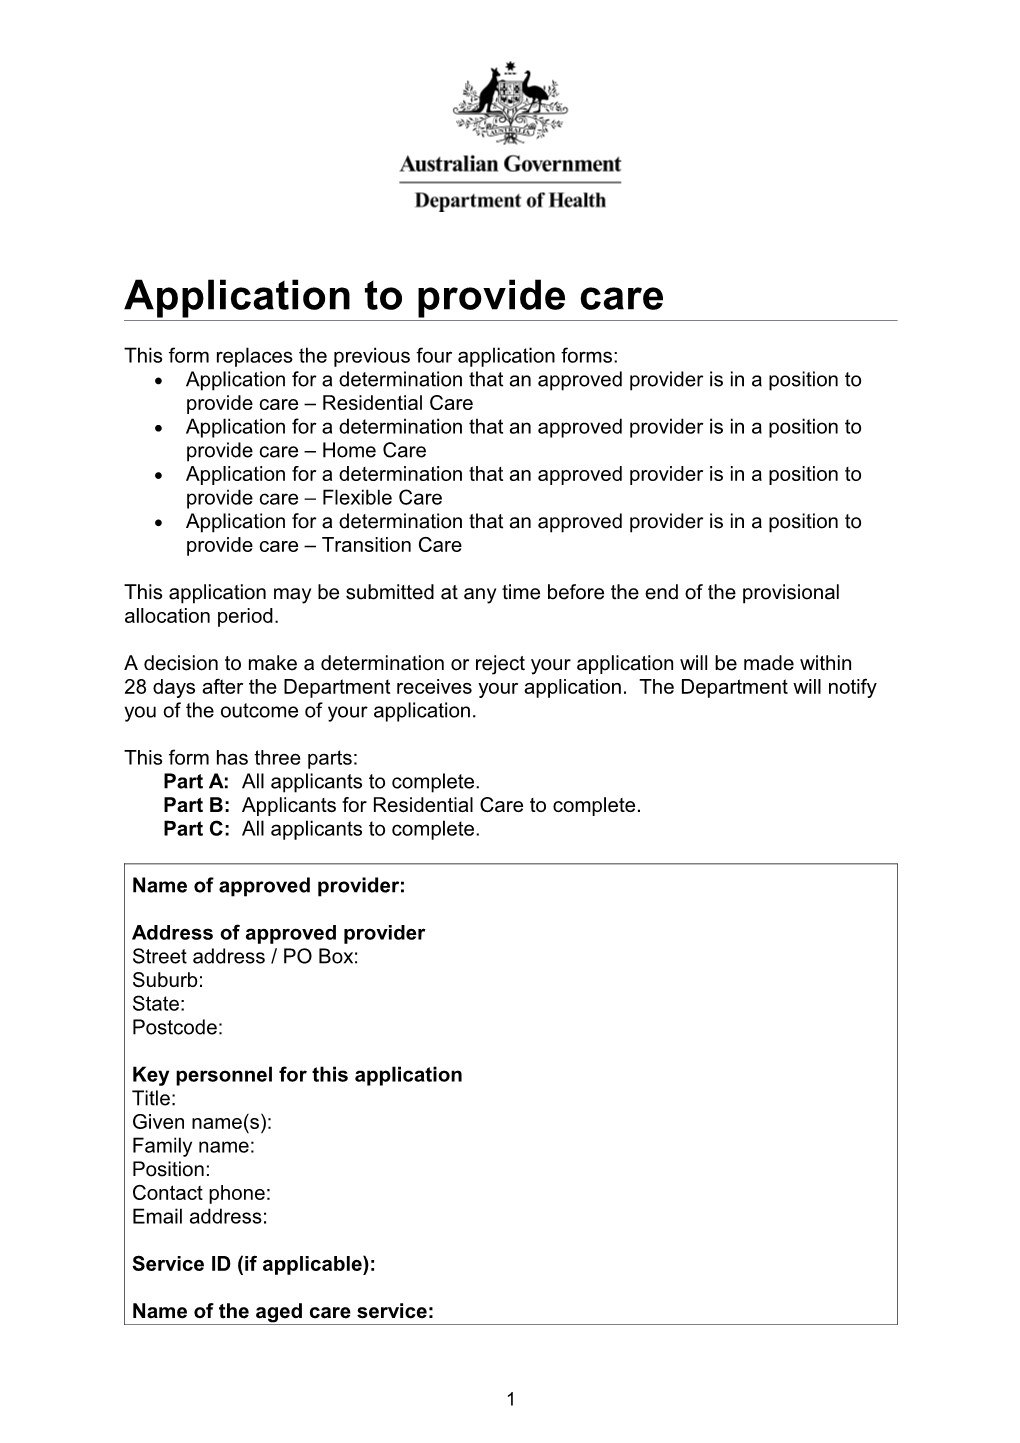 Application to Provide Care